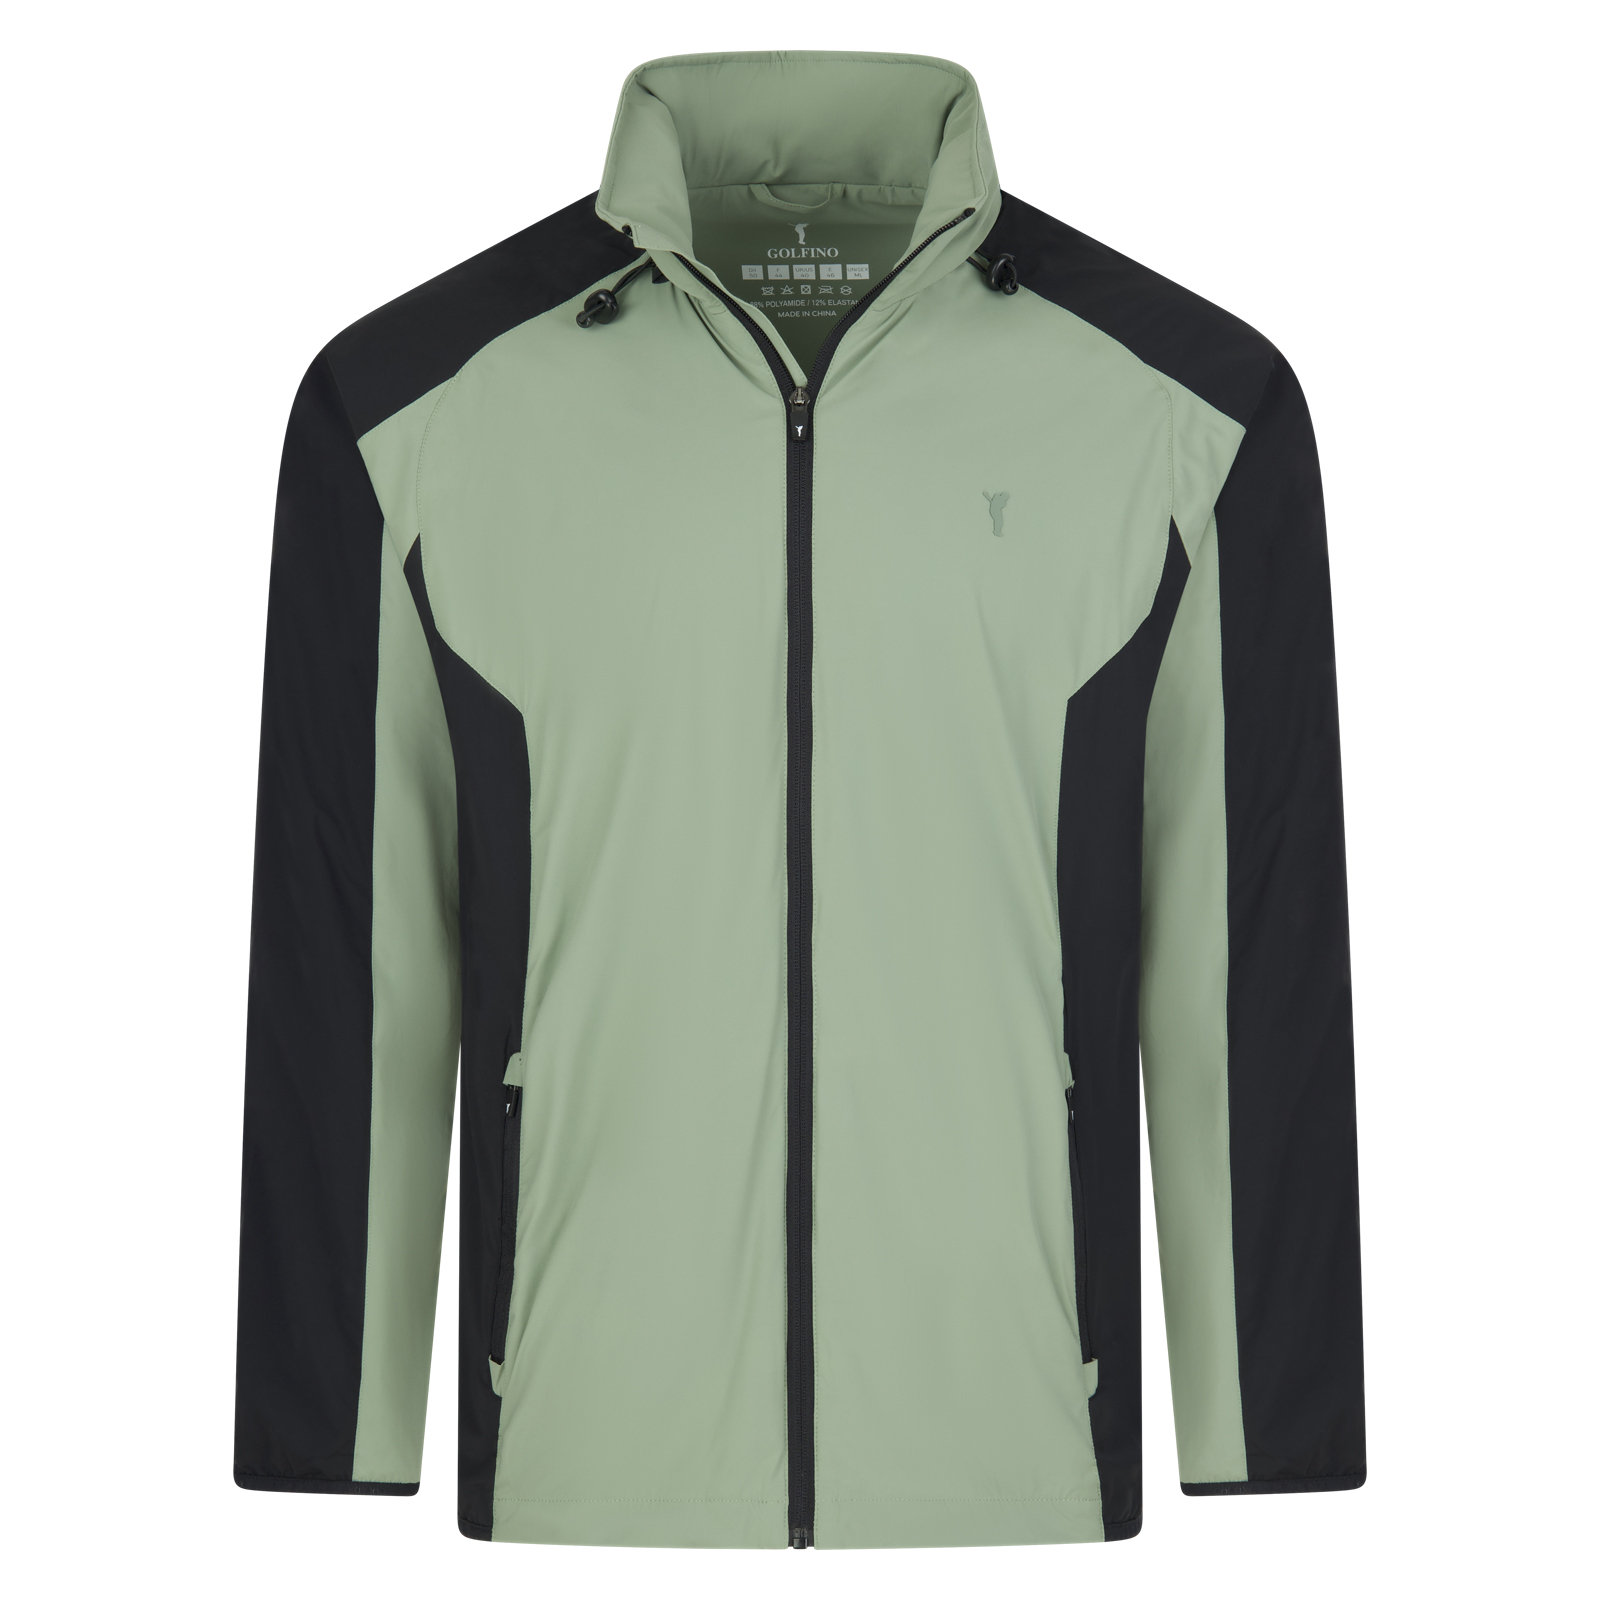 Men's water repellent golf jacket with cold protection function